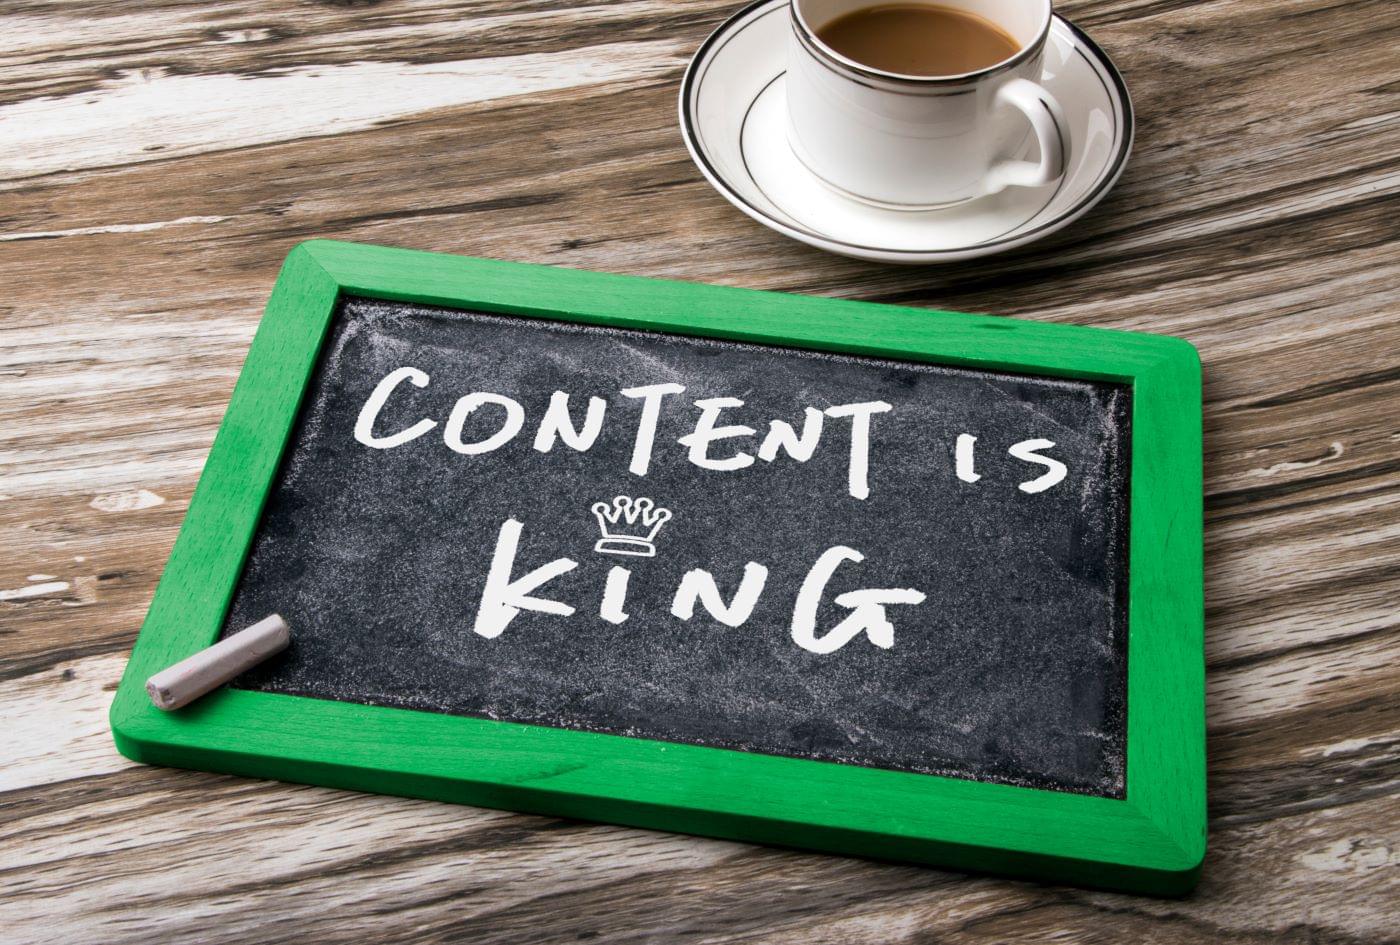 Blackboard with "content is king" written on it next to a cup of coffee.